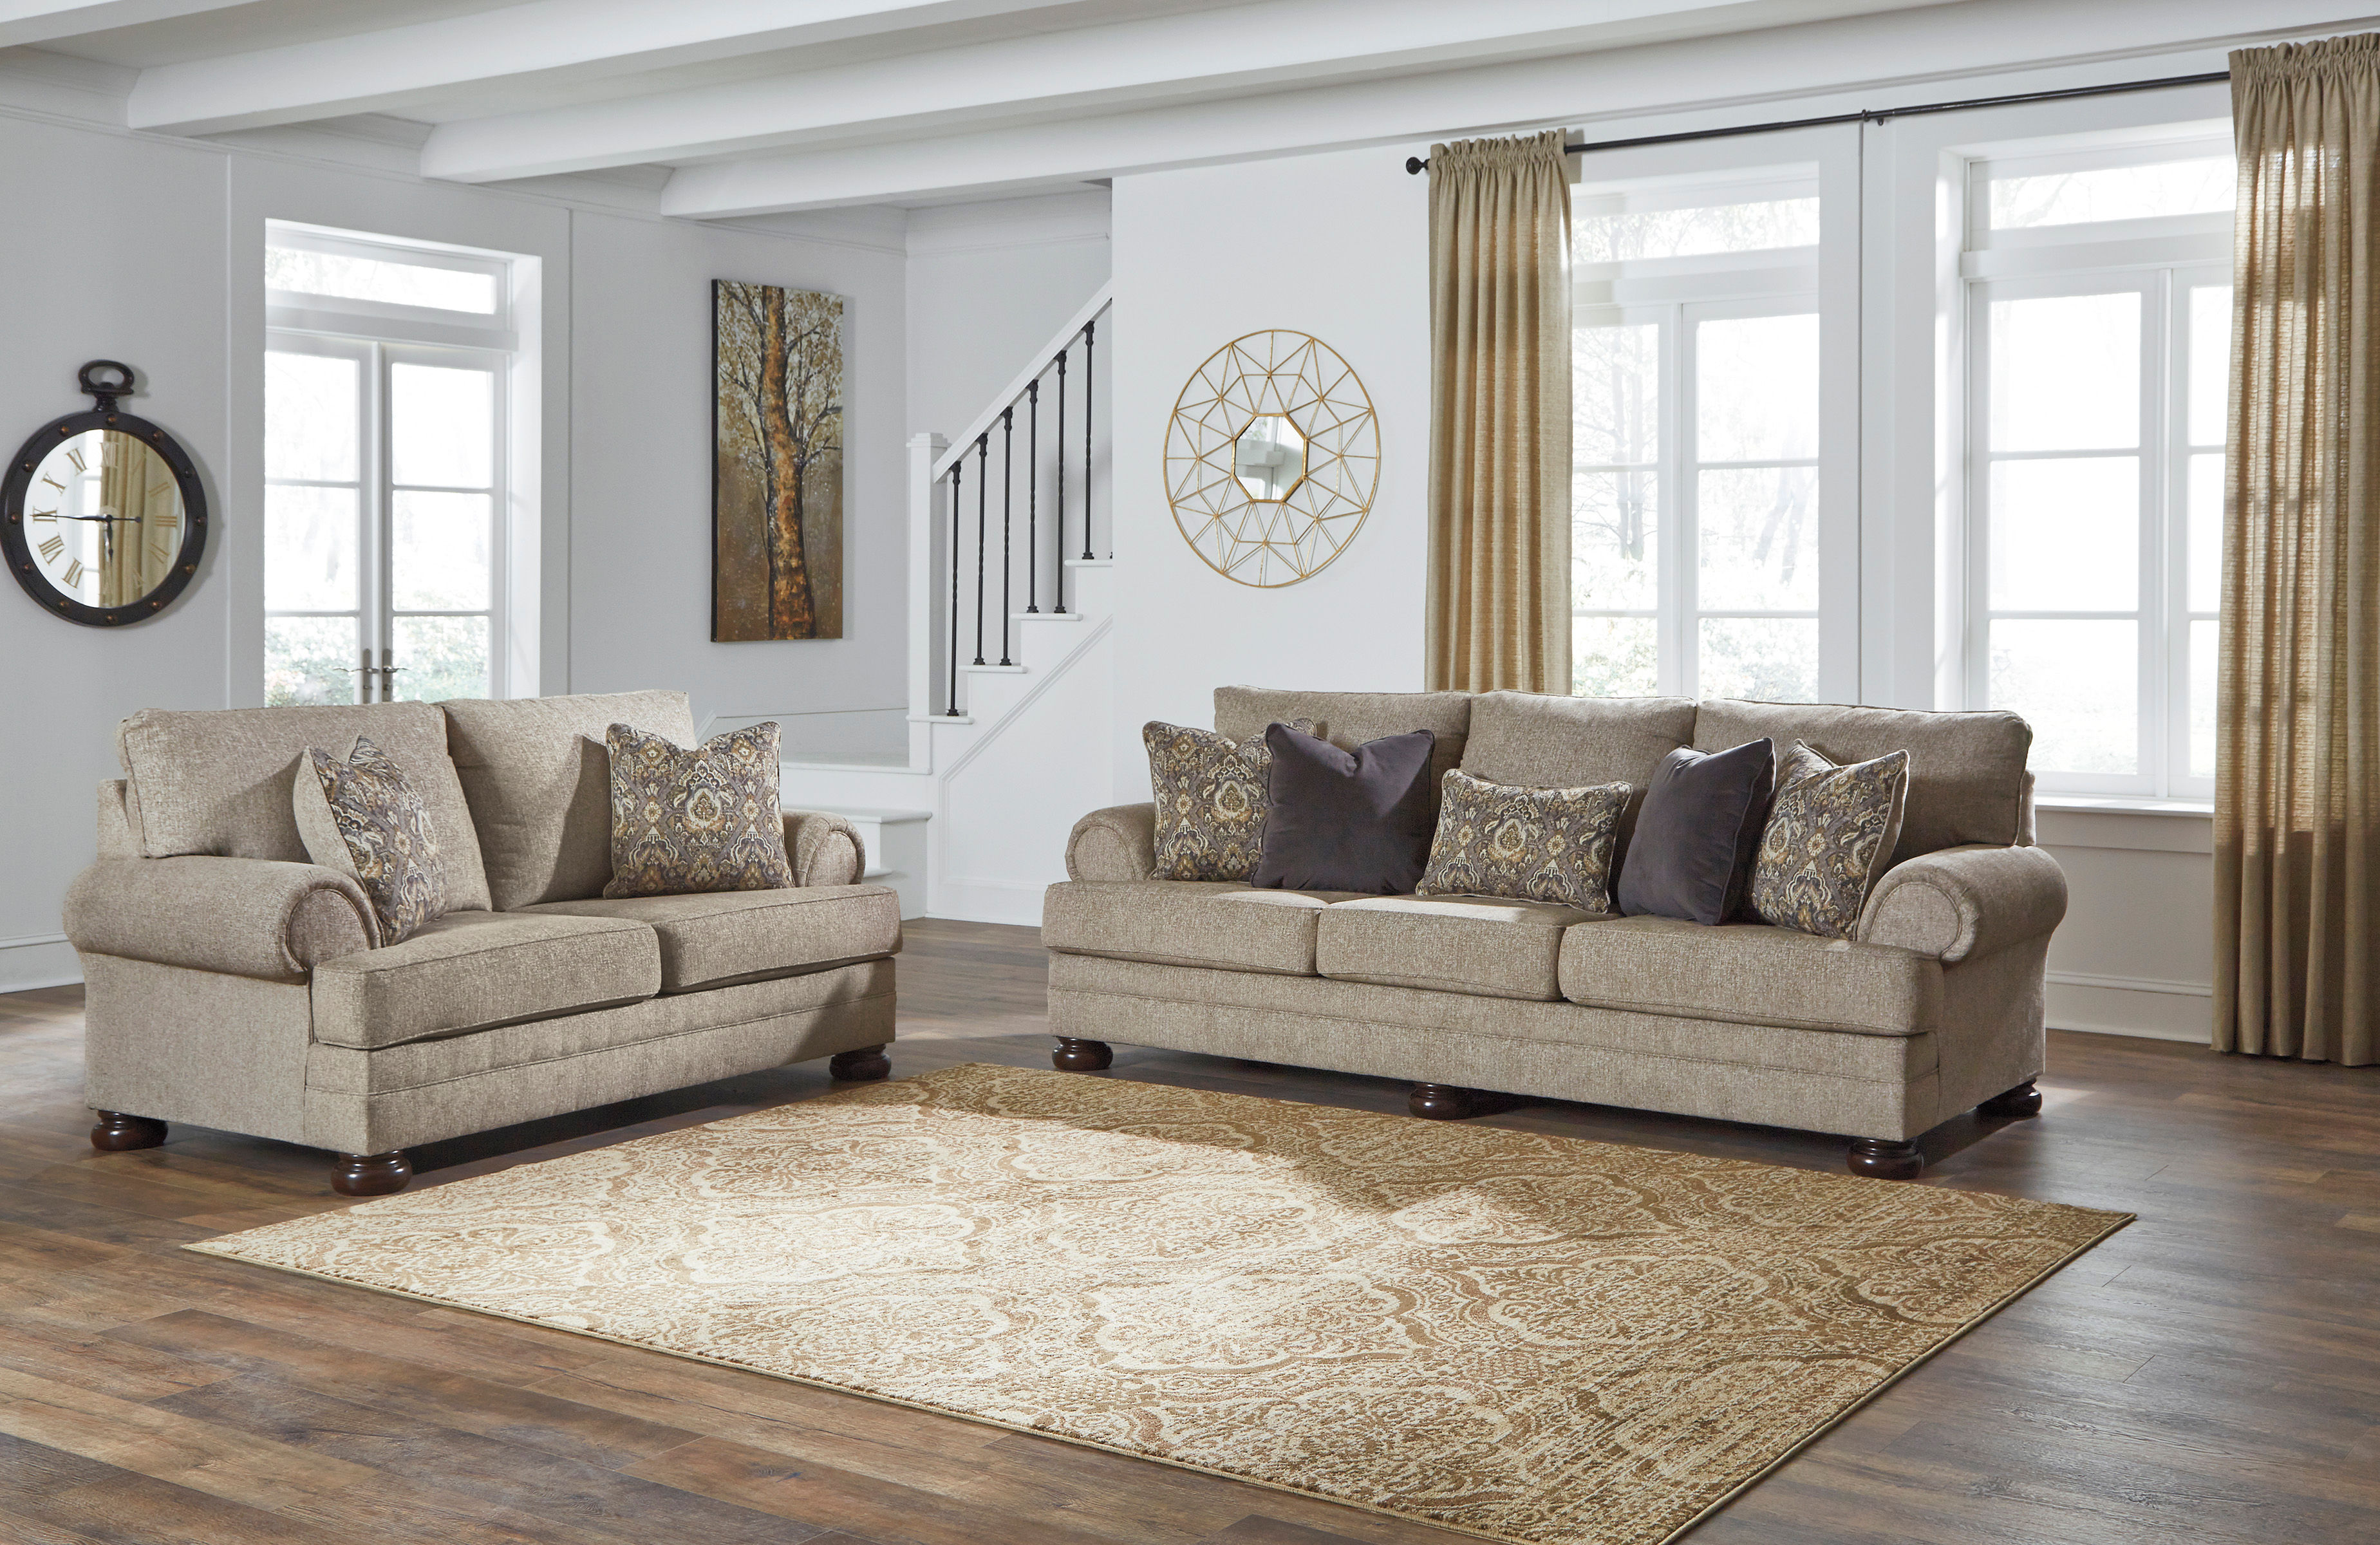 Rent Signature Design By Ashley Kananwood Oatmeal Sofa And Loveseat Same Day Delivery At Rent A Center